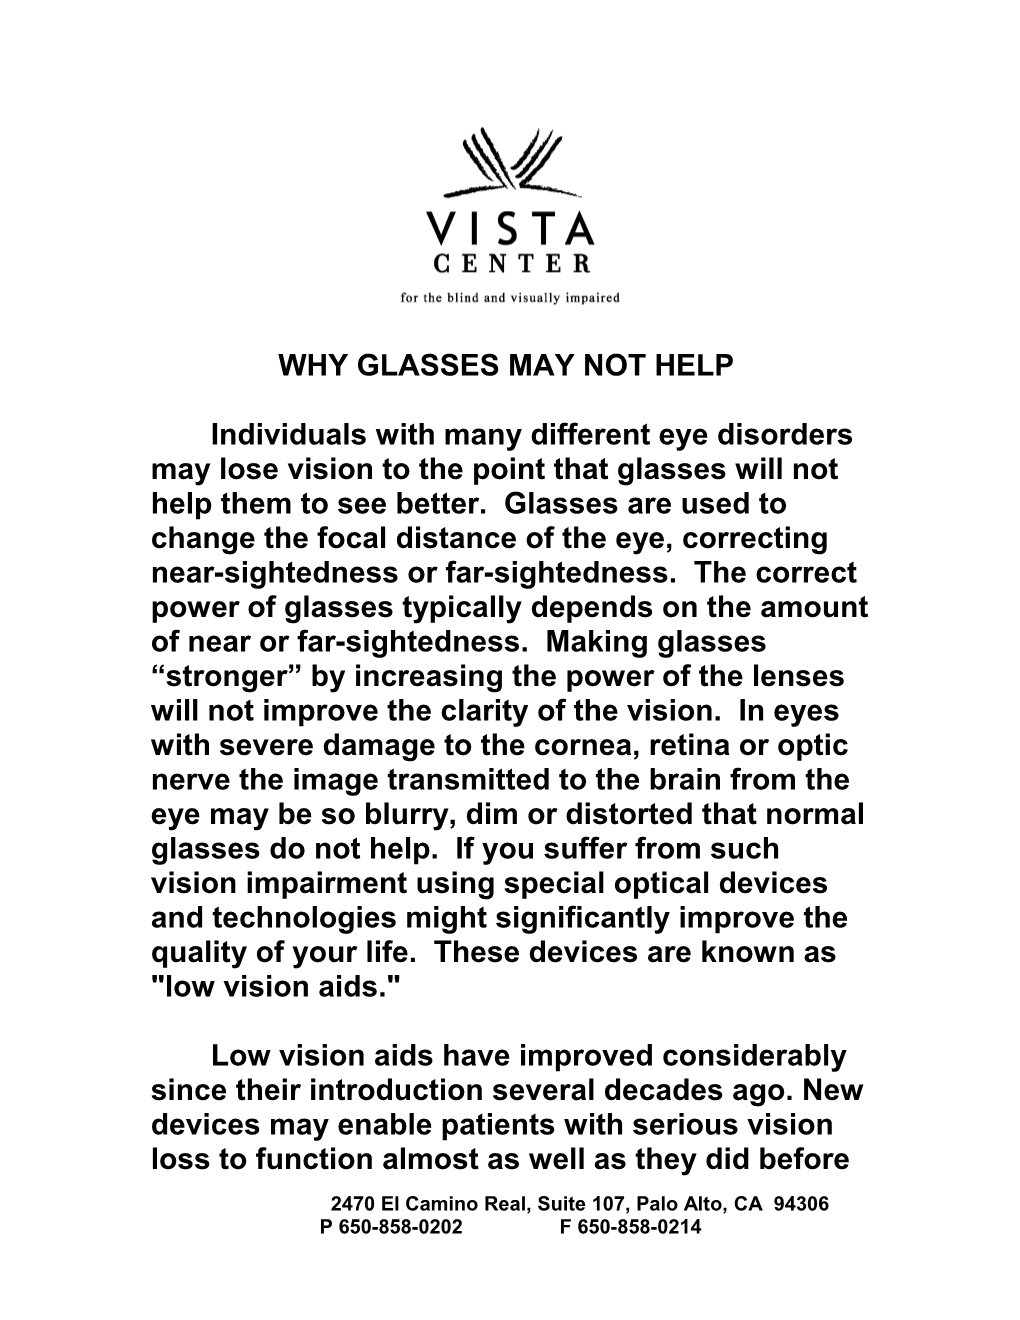 Why Glasses May Not Help